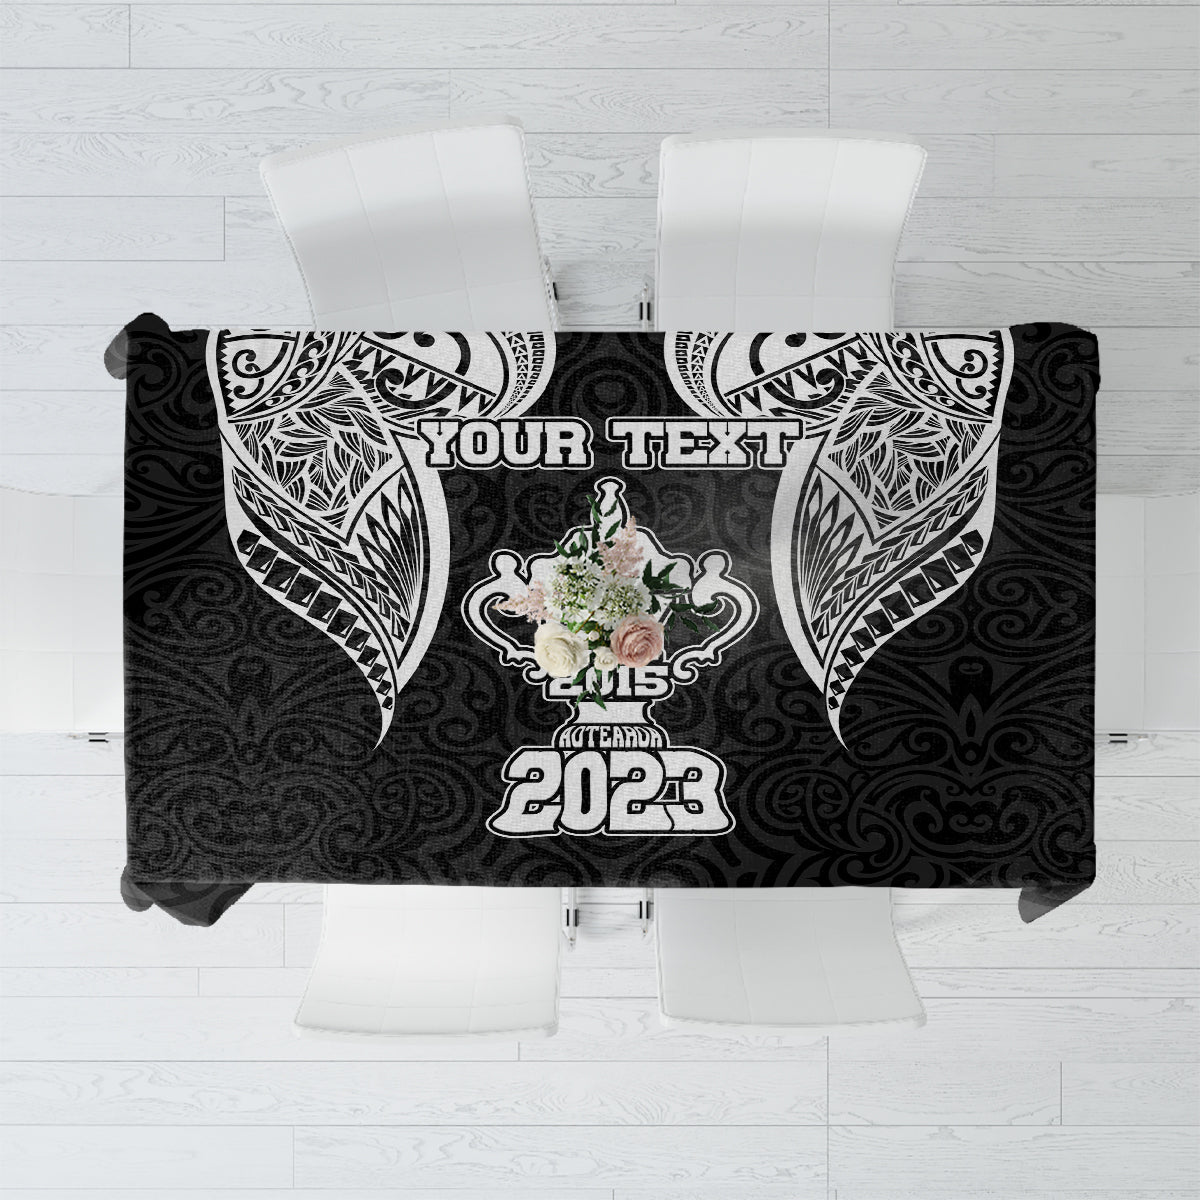 Personalised New Zealand Rugby Tablecloth Aotearoa Champion Cup History with Haka Dance LT03 Black - Polynesian Pride